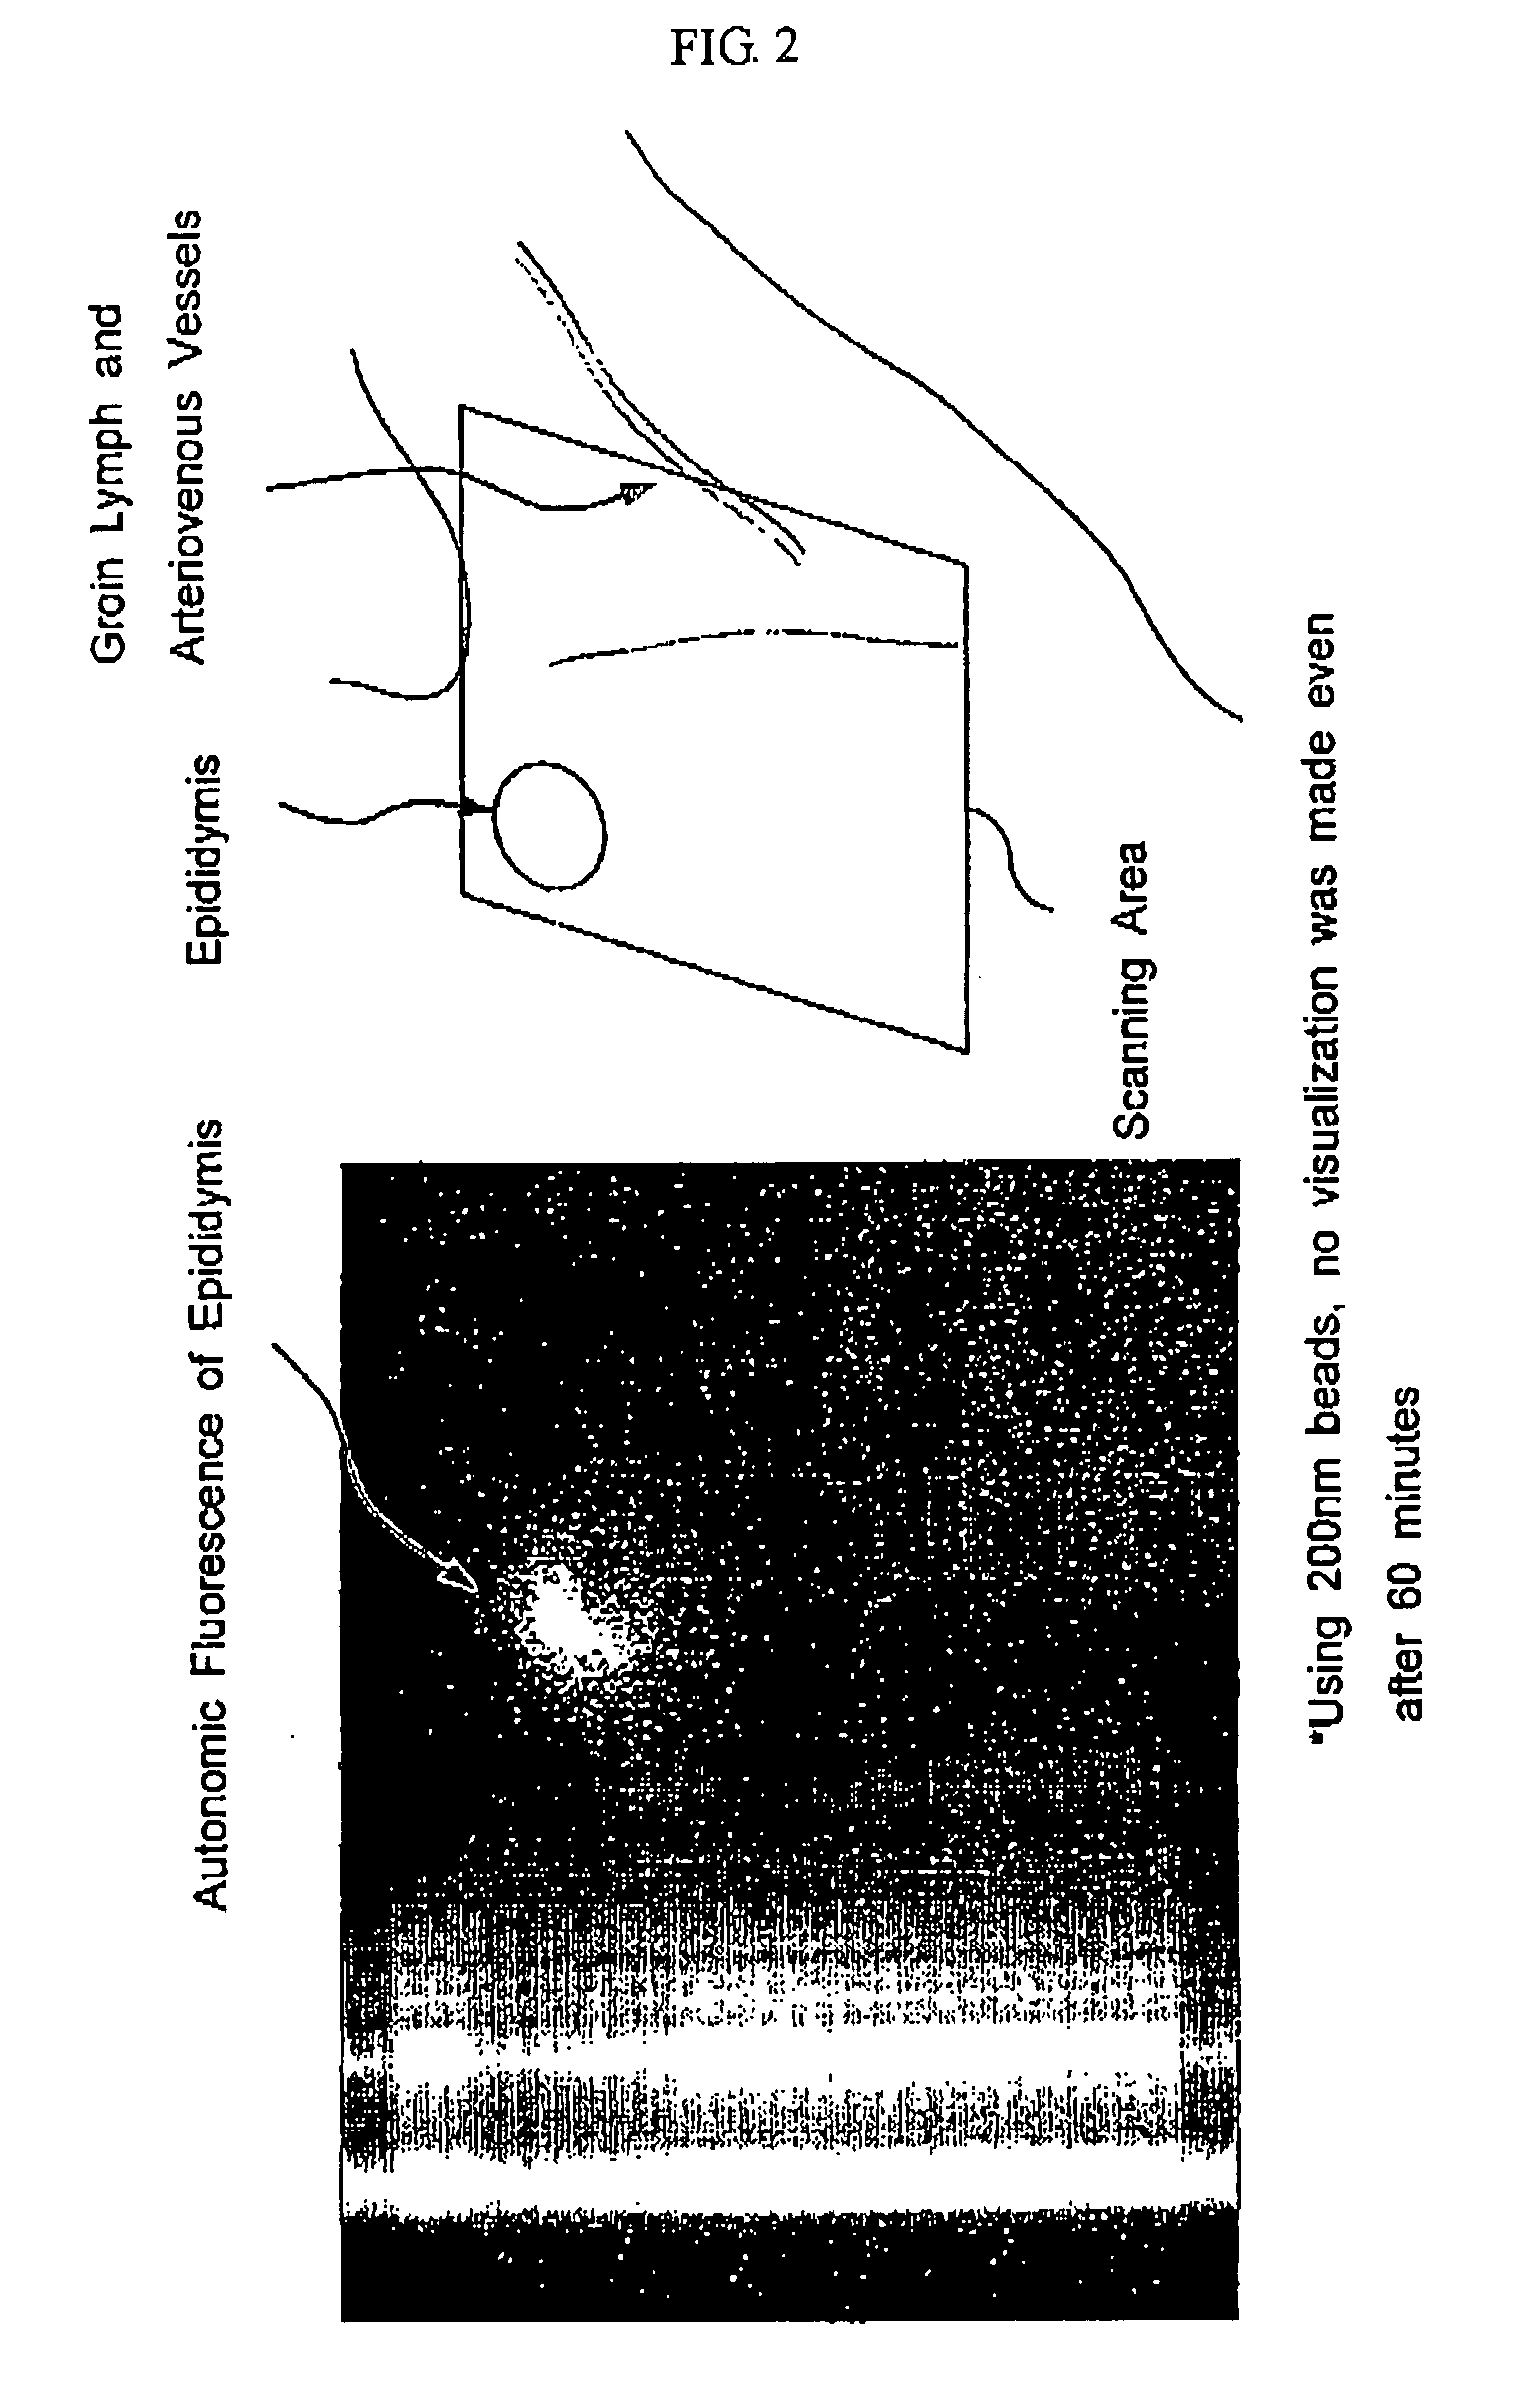 Agent for detecting sentinel lymph node and detection method